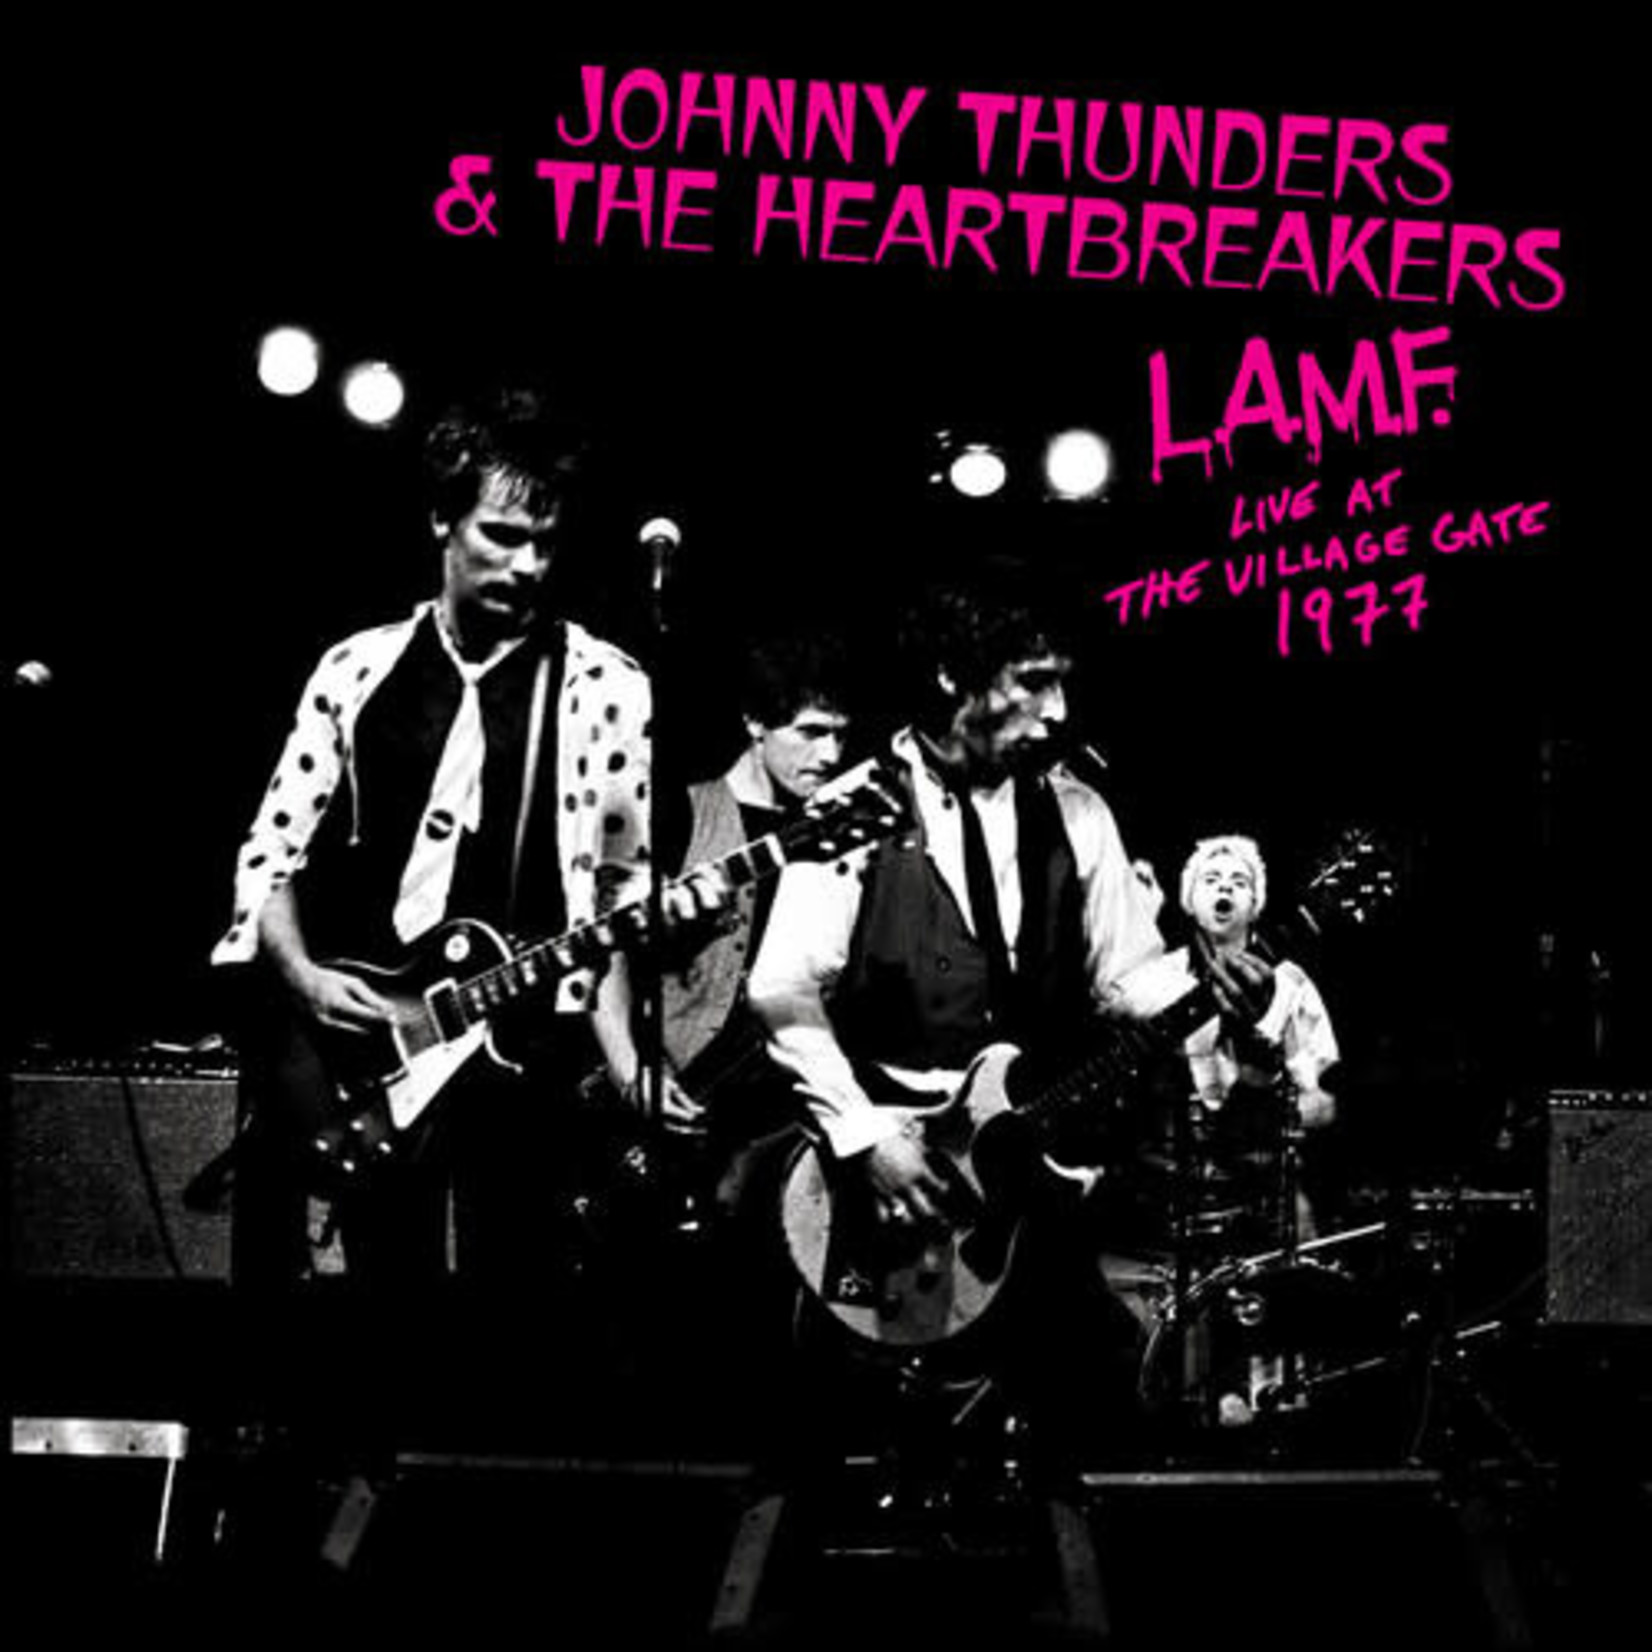 Cleopatra Johnny Thunders & The Heartbreakers - LAMF Live at the Village Gate 1977 (LP) [White]